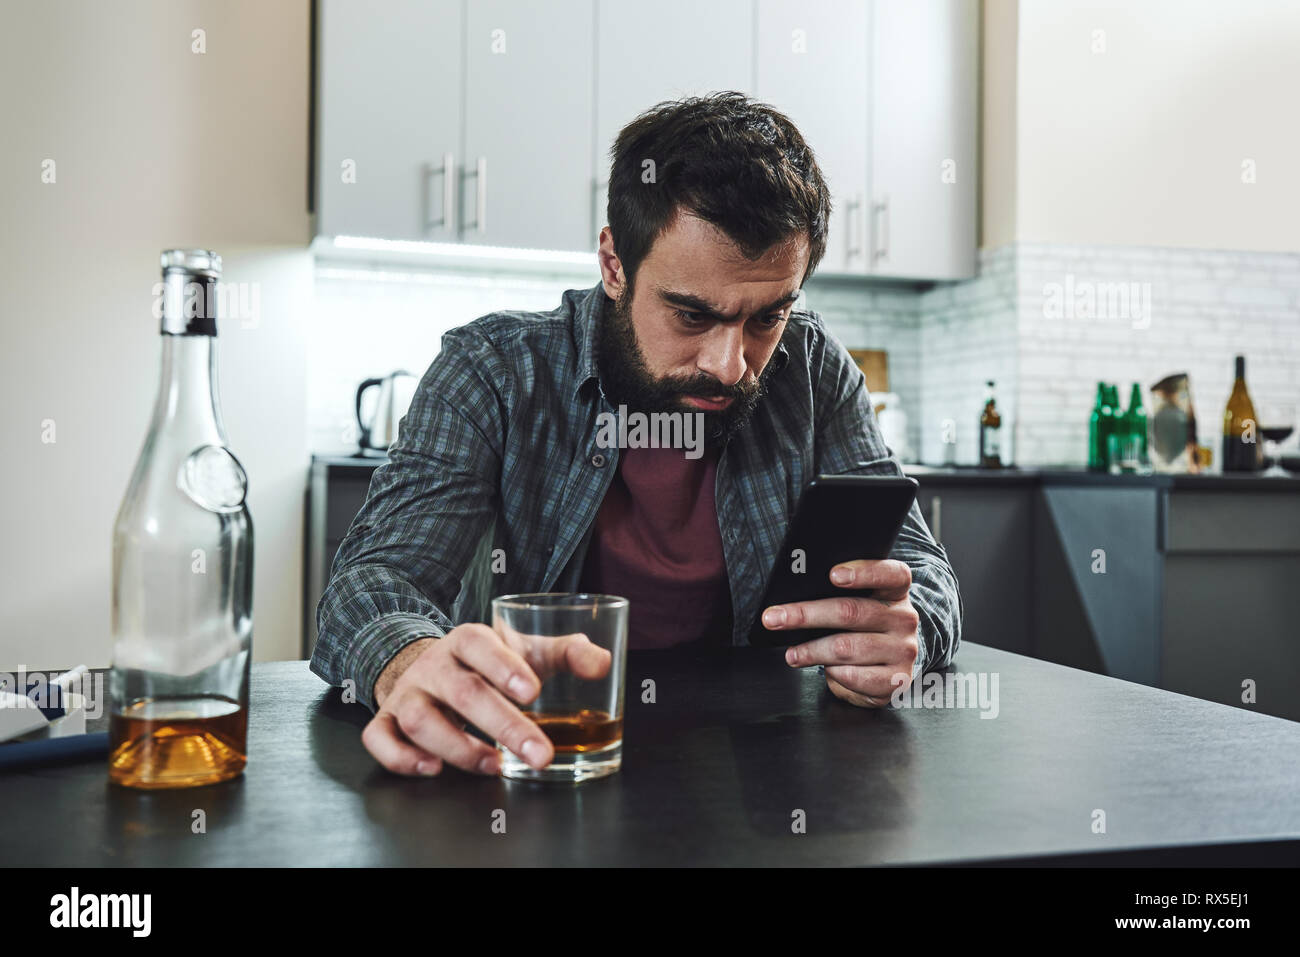 Portrait of young man in despair, sitting at table, drinking alcohol at home. He holds his phone while waiting for phone call. Male alcoholism concept Stock Photo